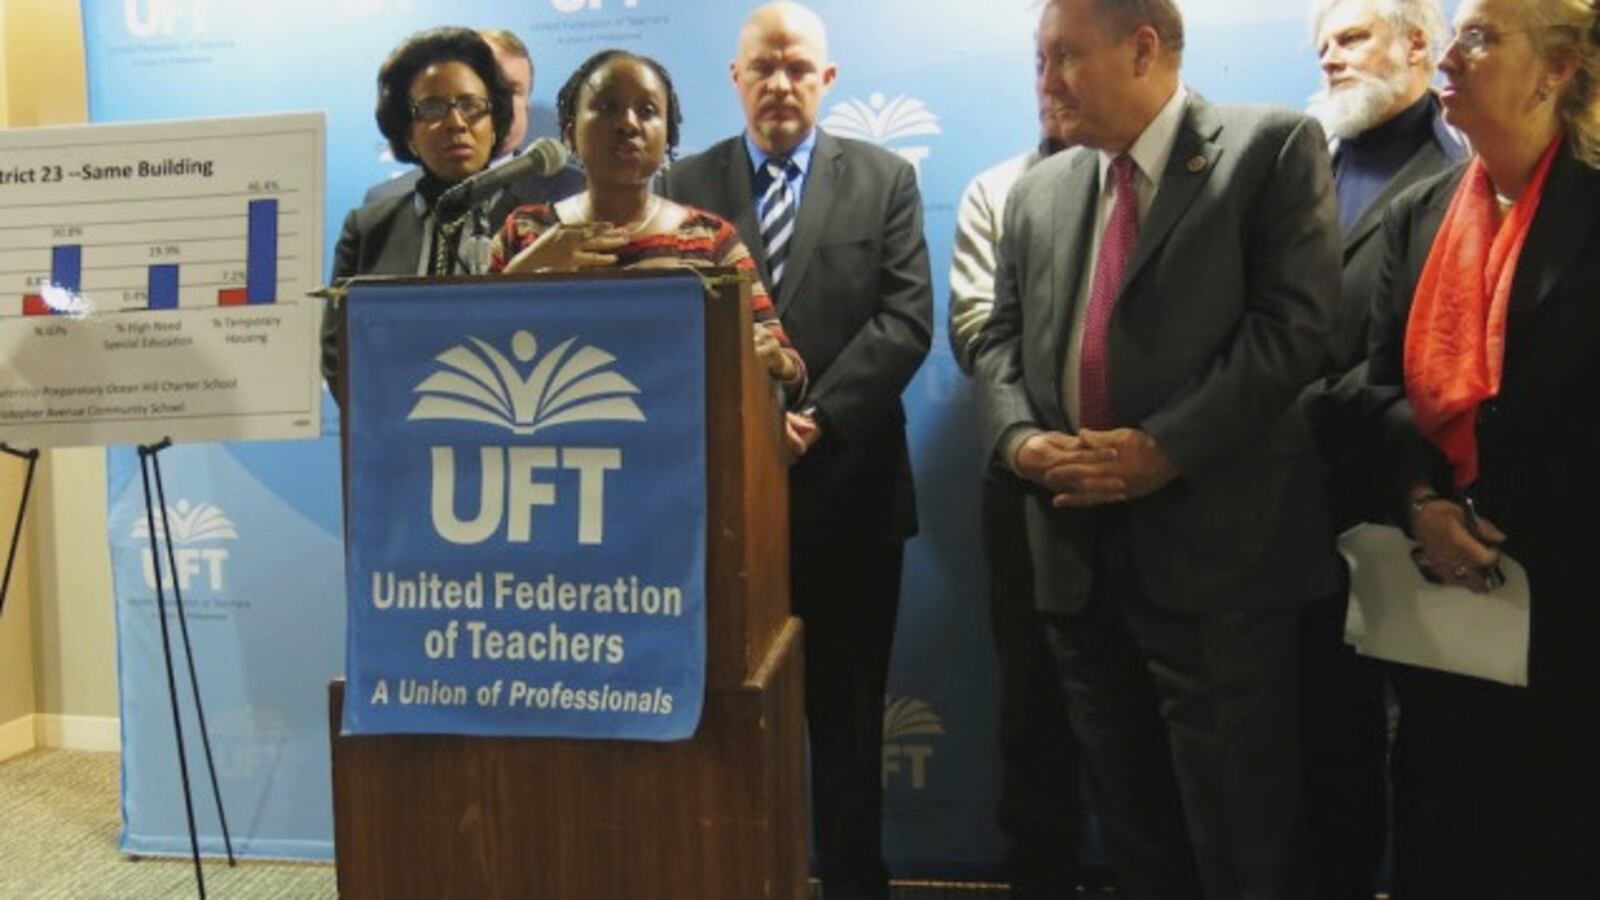 Elected officials and teachers join UFT President Michael Mulgrew at a press conference to spotlight enrollment inequities at charter schools.